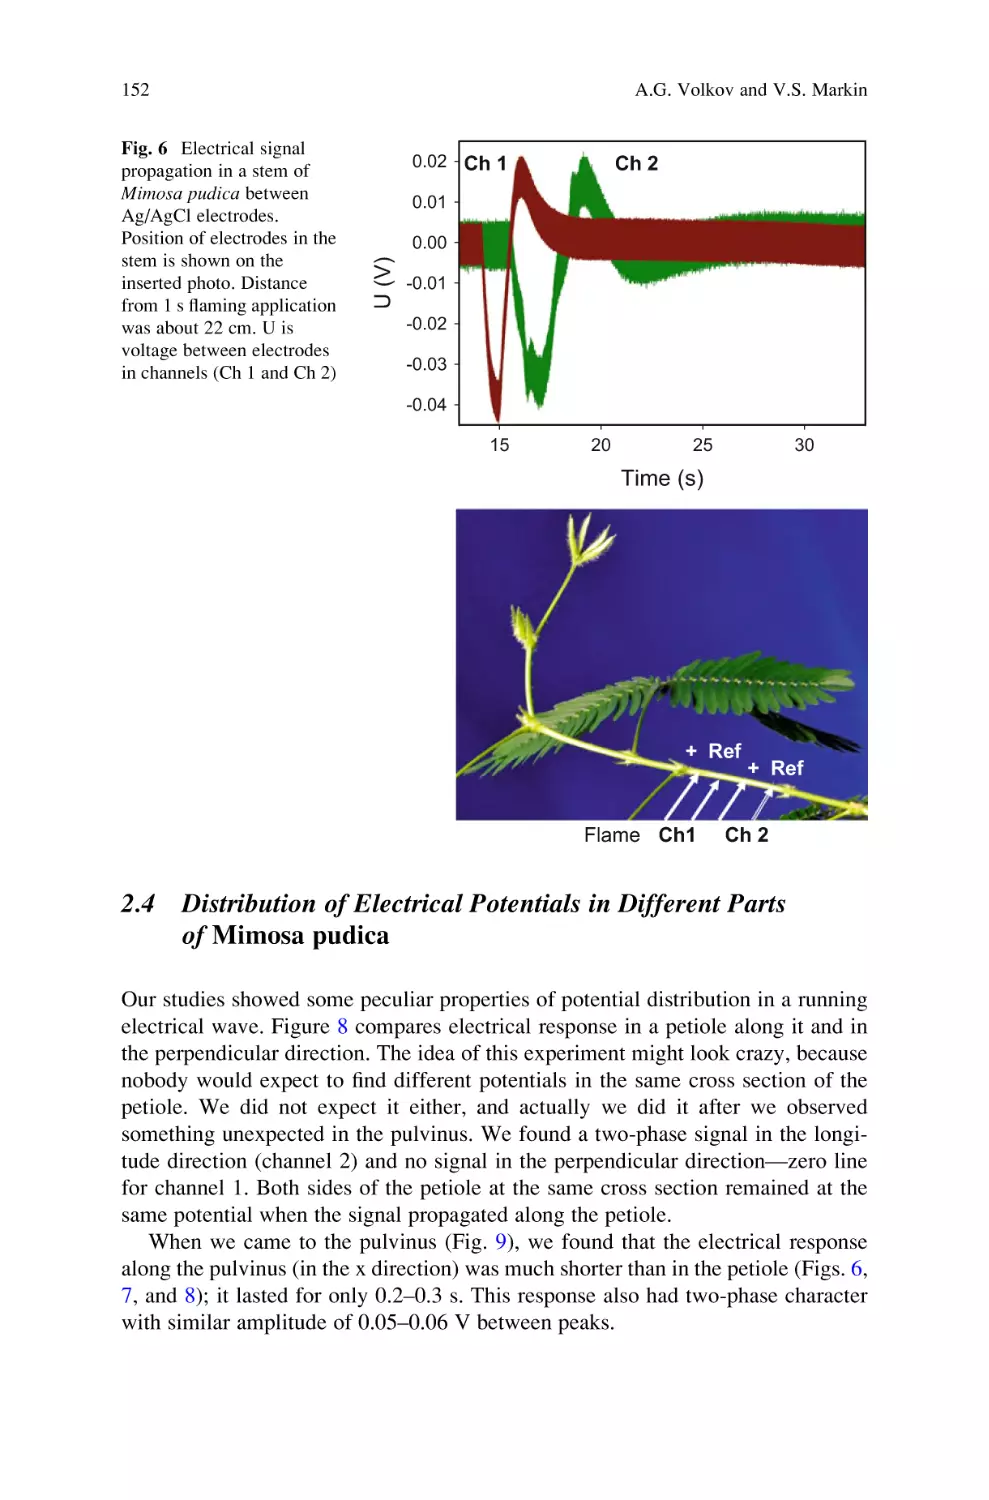 2.4 Distribution of Electrical Potentials in Different Parts of Mimosa pudica